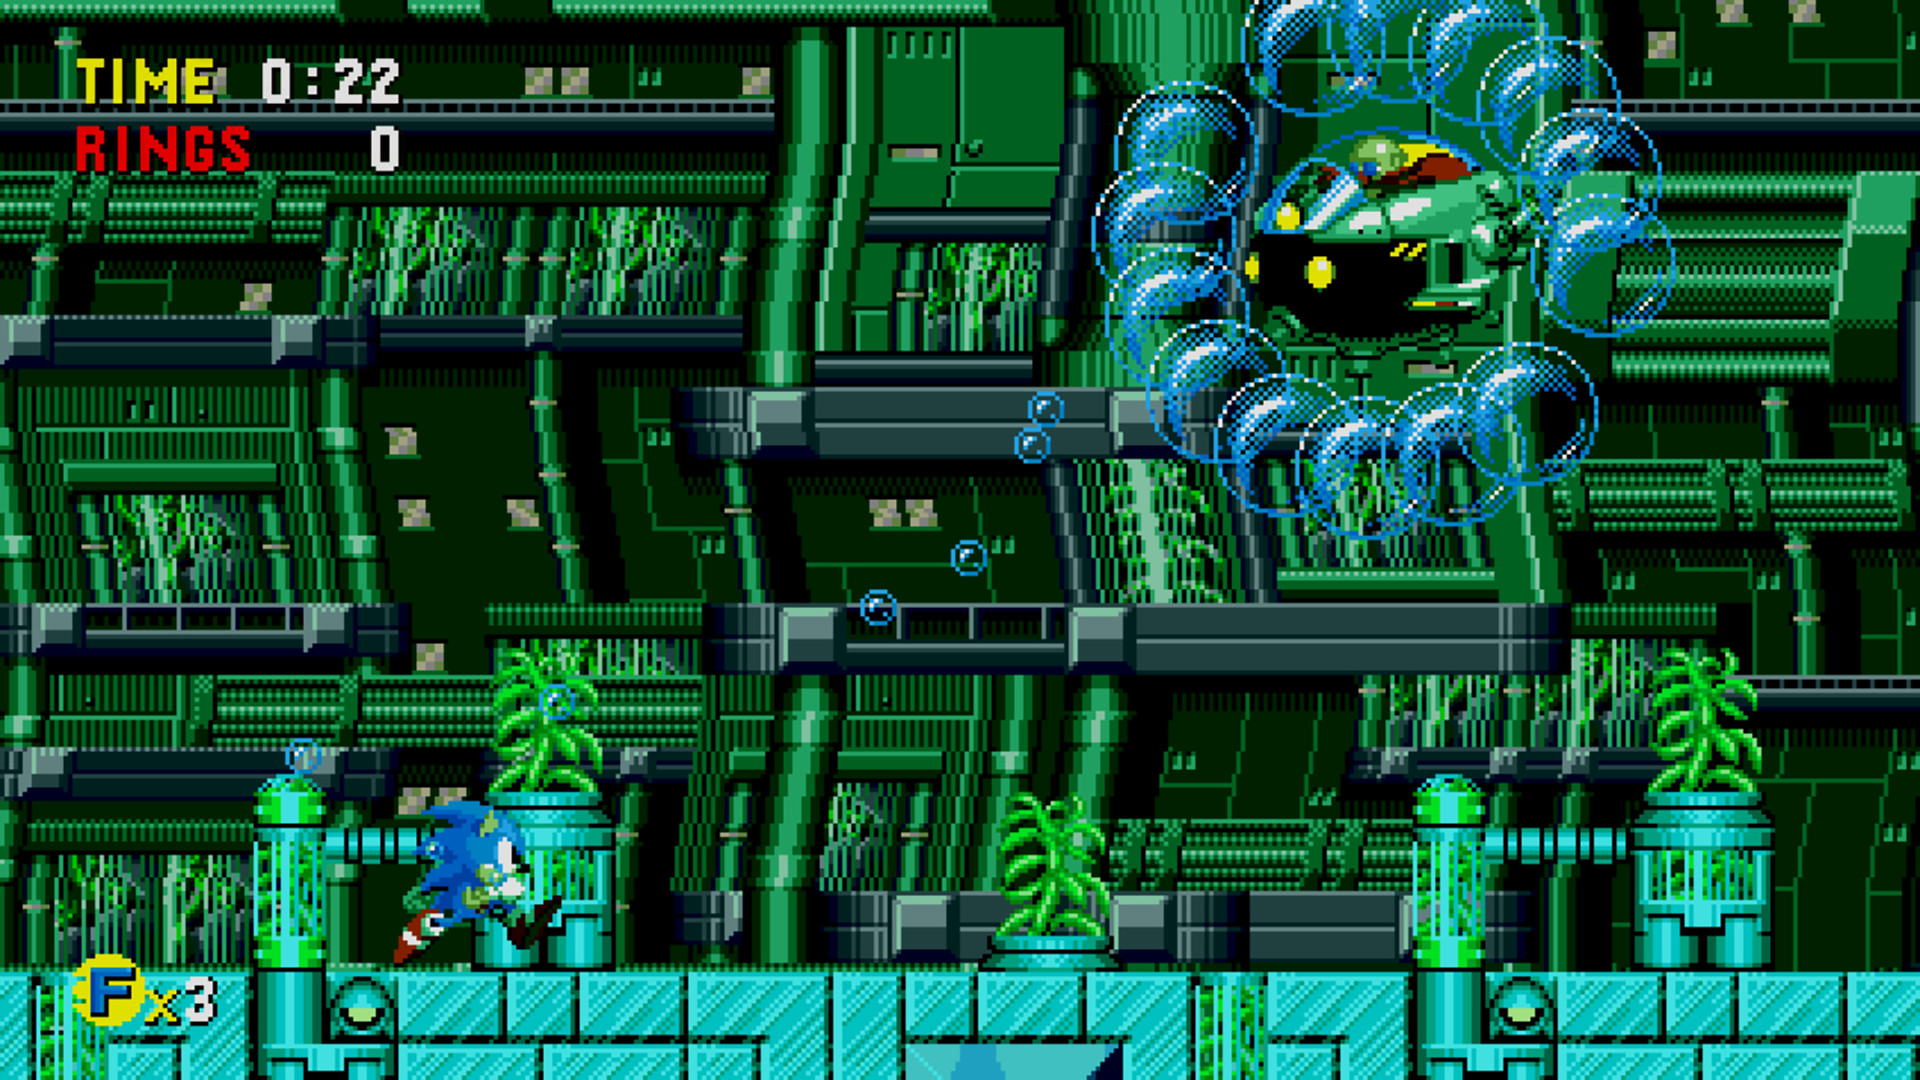 Steam Community :: Guide :: Sound Test Codes for Sonic CD